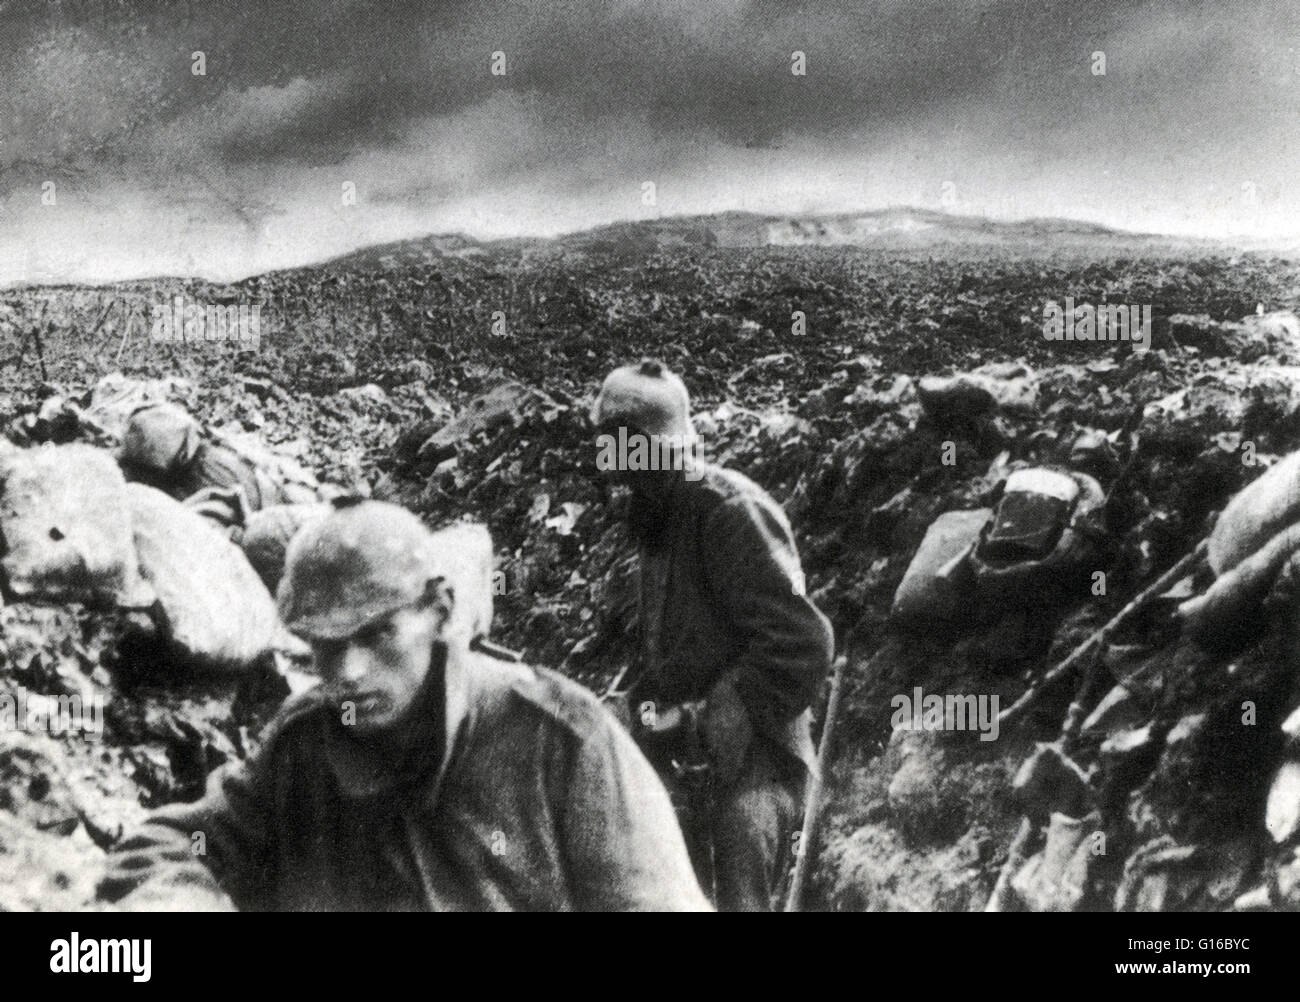 Germans in trench near Verdun, as their artillery barrage begins. The Battle of Verdun was fought from February 21 - December 18, 1916 during WWI on the Western Front between the German and French armies, on hills north of Verdun-sur-Meuse in north-easter Stock Photo